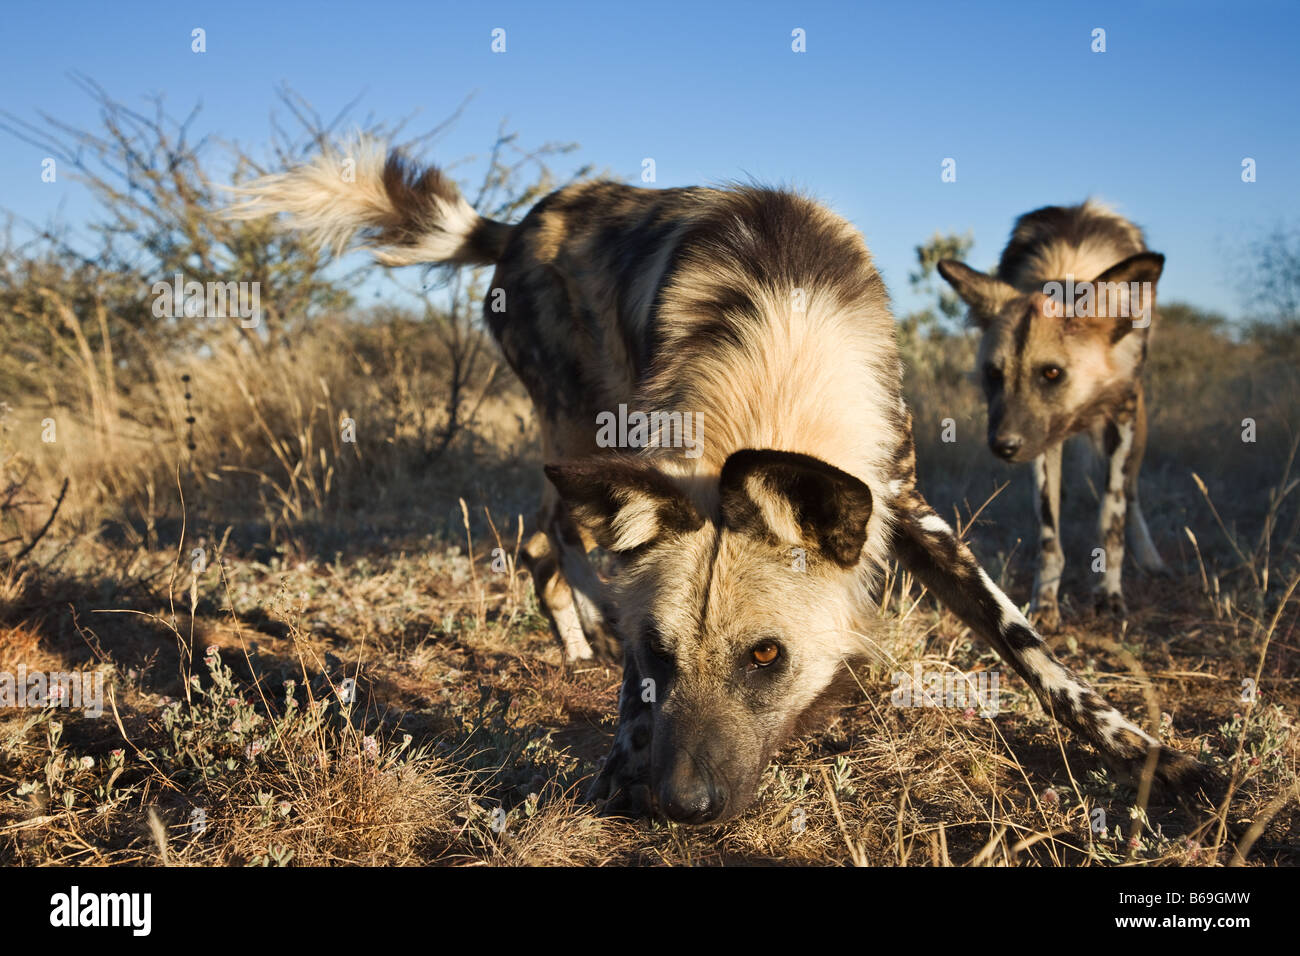 African Wild Dogs Lycaon pictus Endangered Dist Sub Saharan Africa Stock Photo